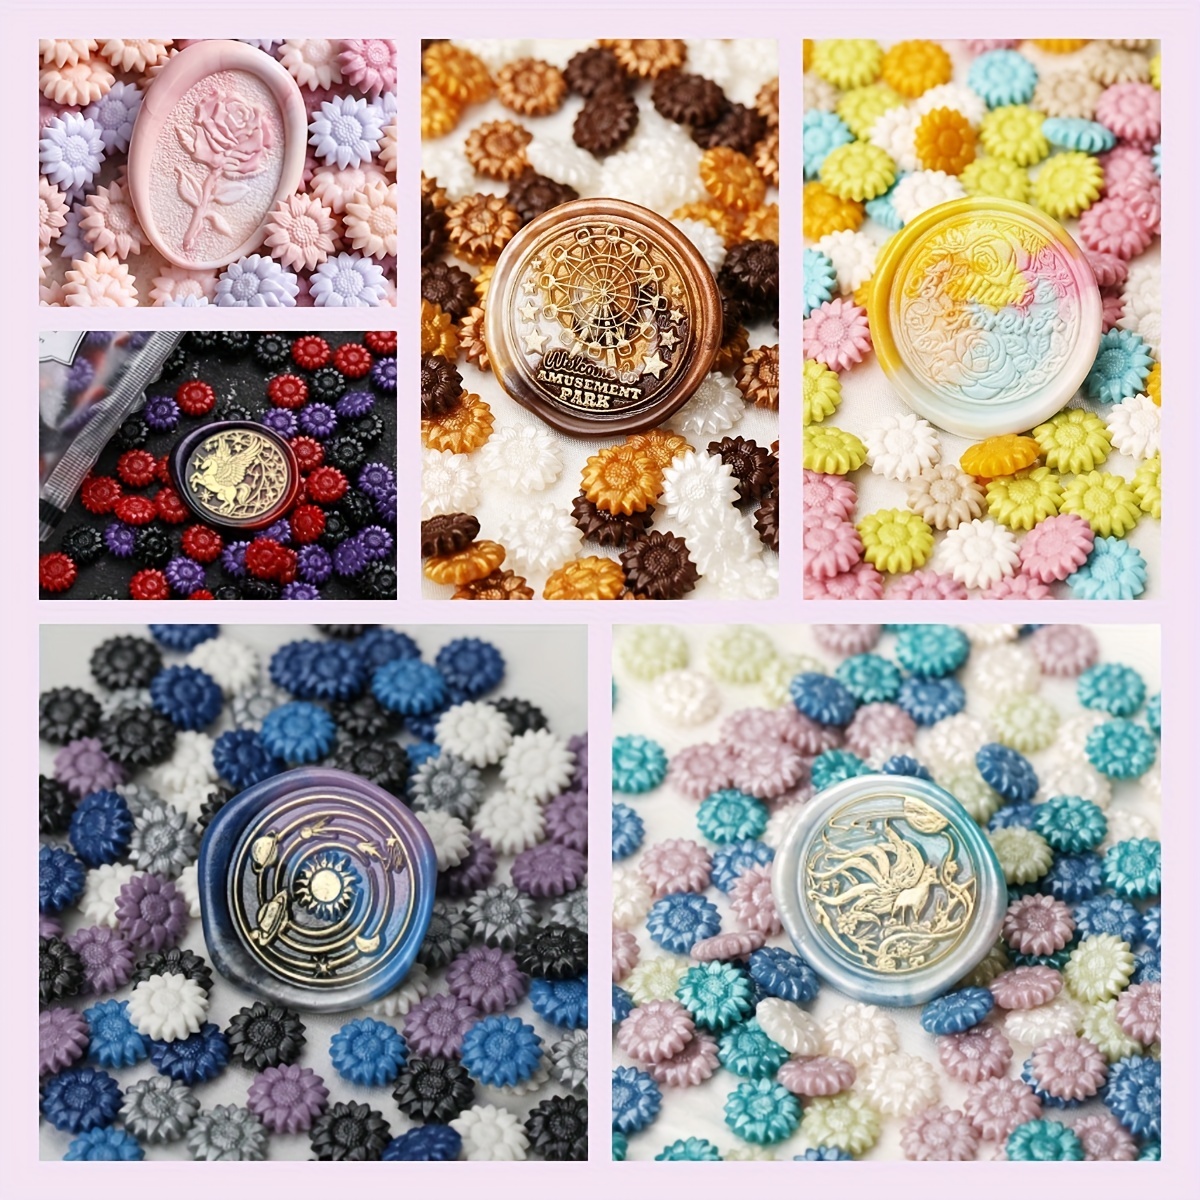  Metallic Assorted Color Wax Seal Beads - 24 Colors Sealing Wax  Beads for Making Wax Seals, Decor for Envelope Letter Wedding Invitation  and Sealing Wine Bottle : Arts, Crafts & Sewing